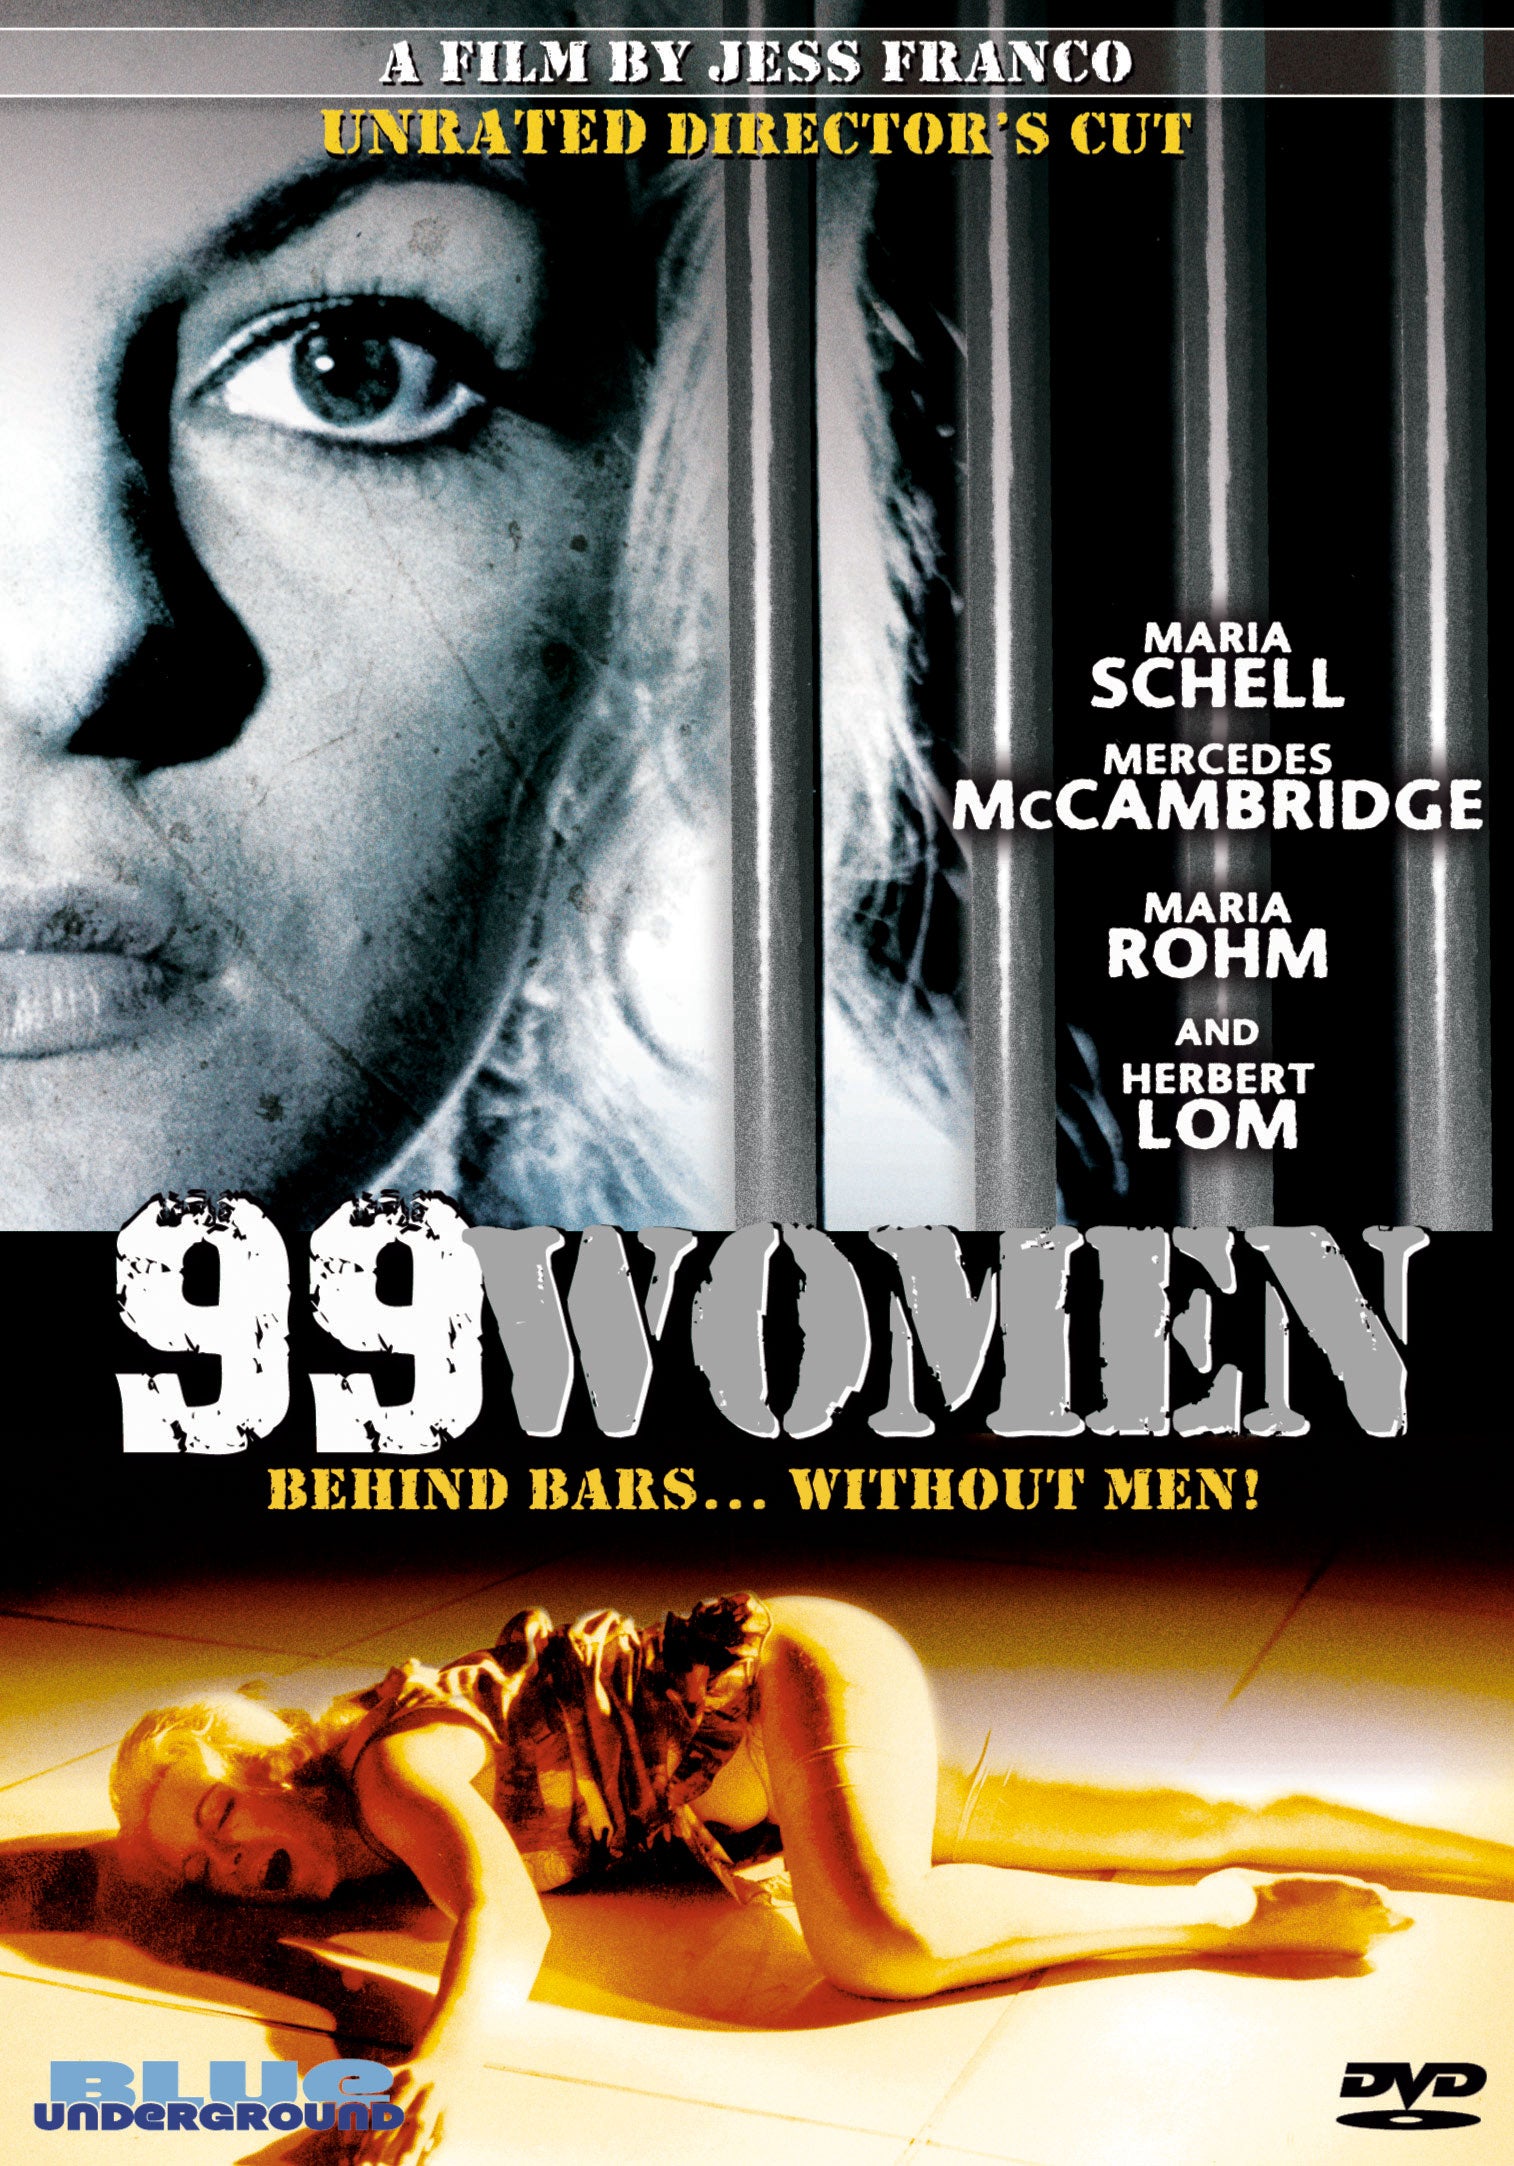 99 WOMEN (UNRATED DIRECTOR'S CUT) DVD